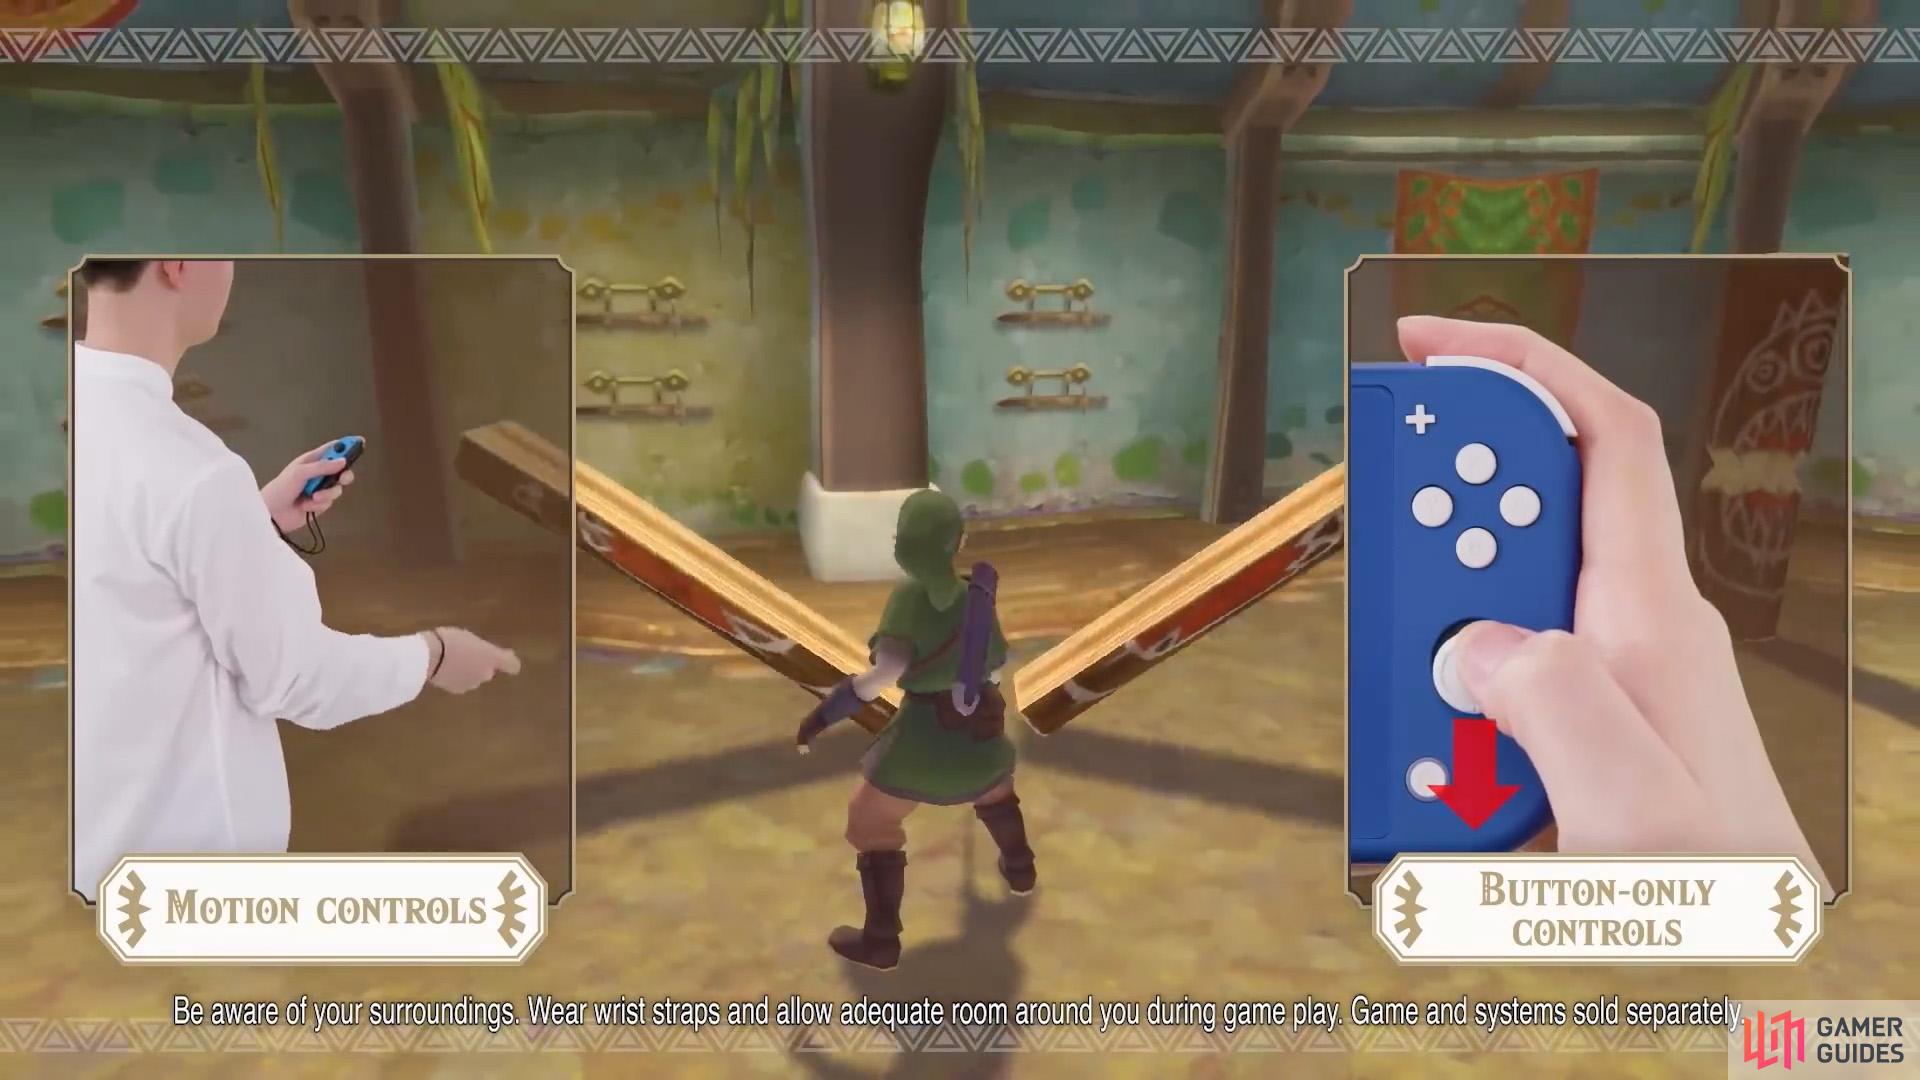 In button mode, the right stick is used to control Links sword.